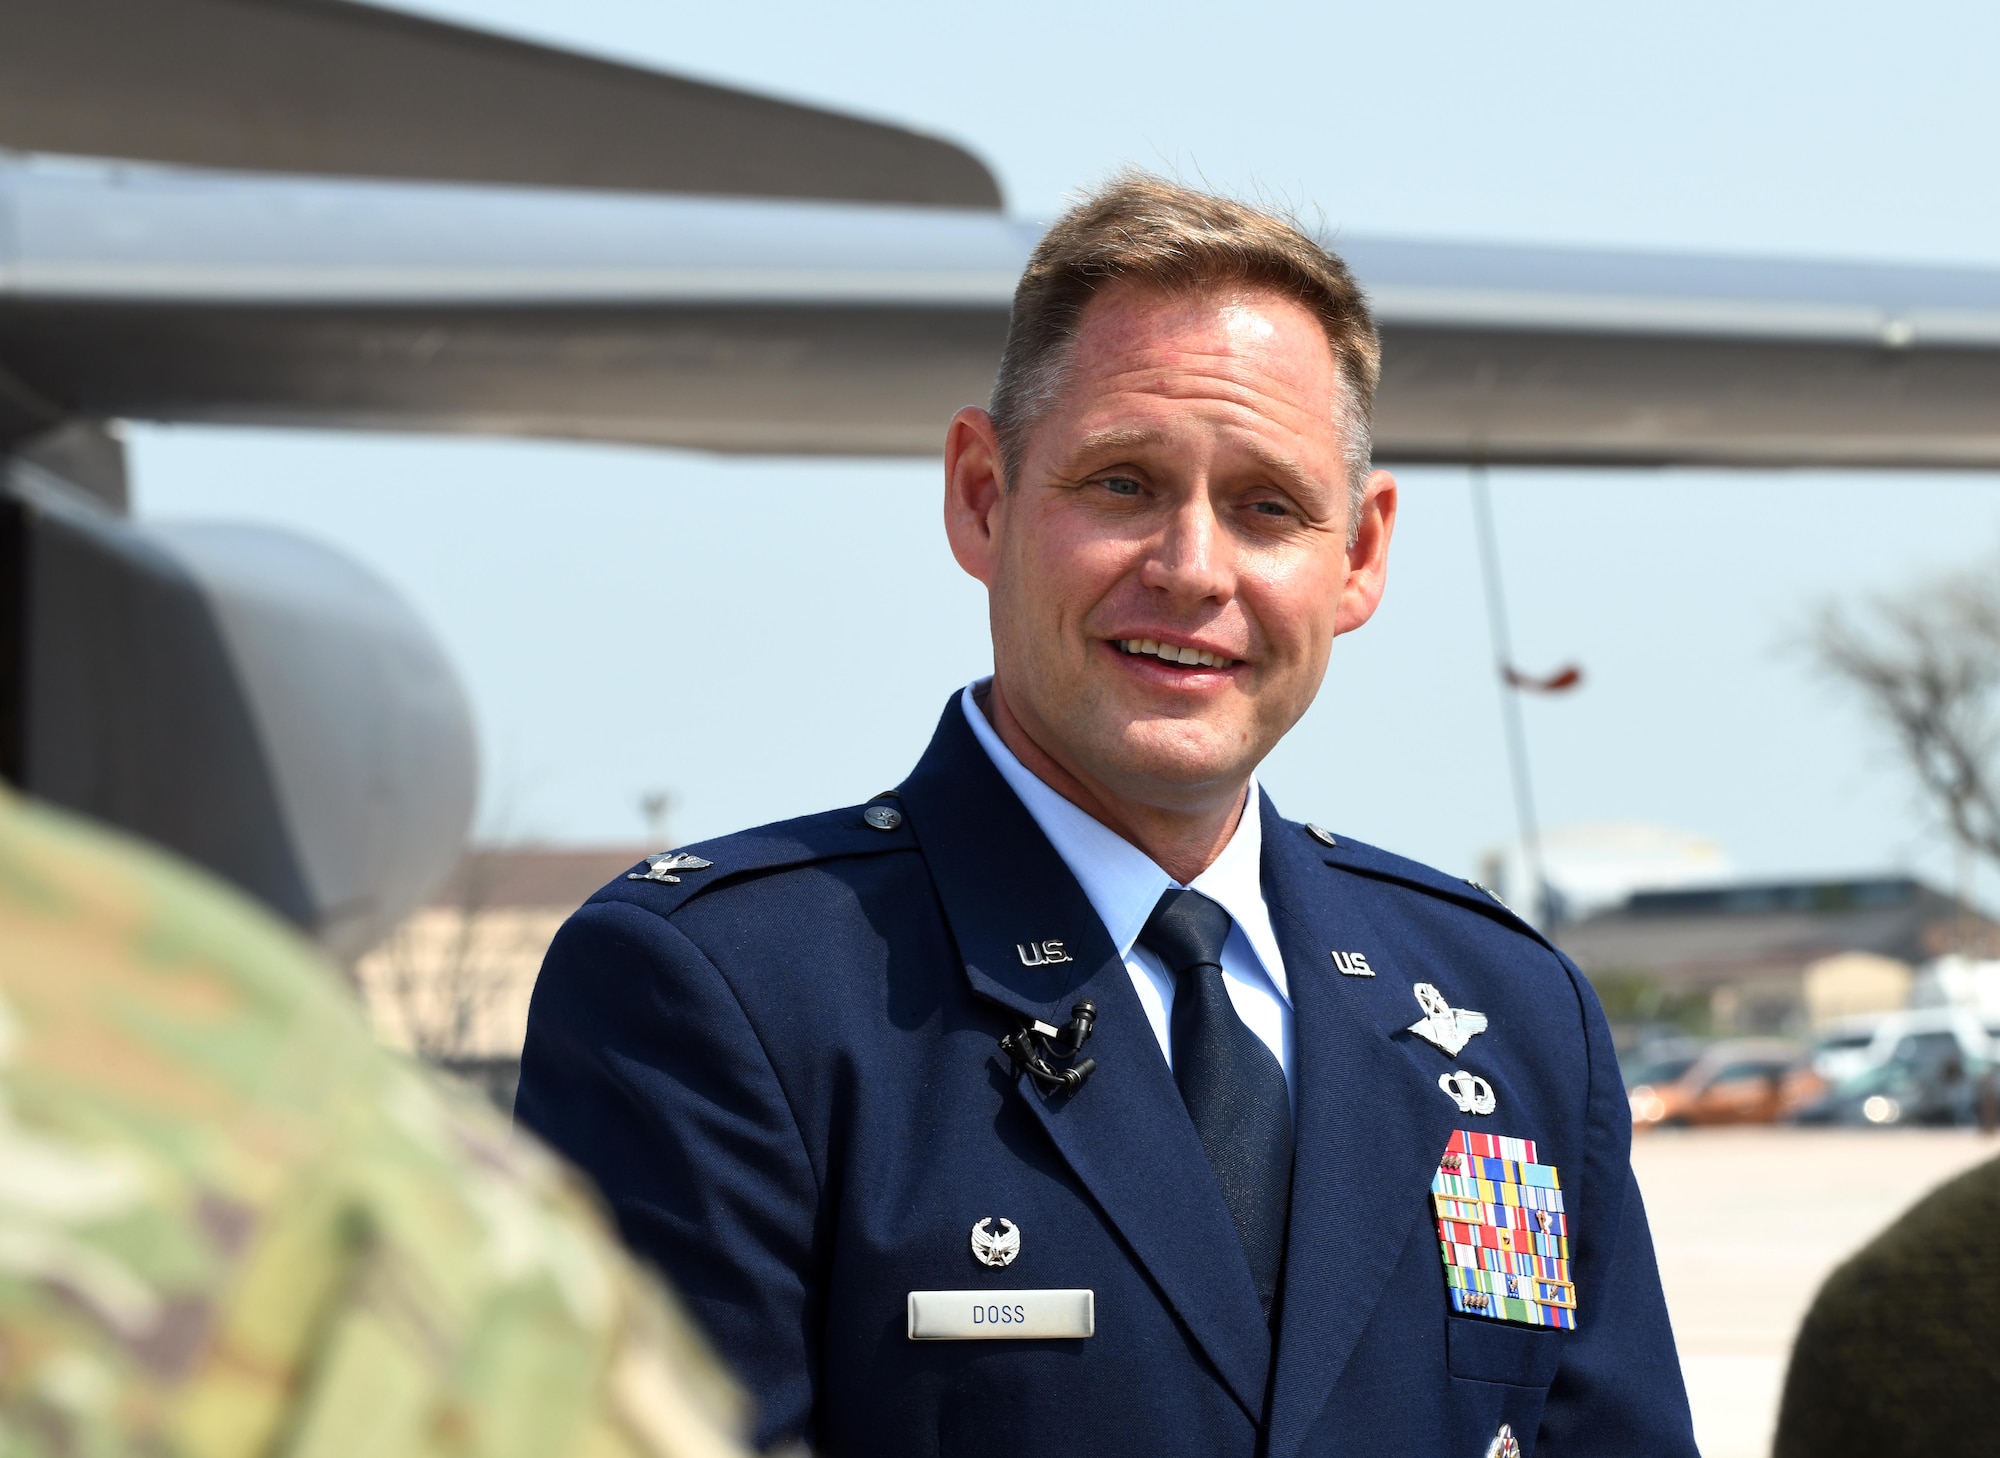 Col. David A. Doss, the 28th Bomb Wing commander, speaks with local media reporters after his change of command ceremony on Ellsworth Air Force Base, S.D., May 30, 2019. As commander, he is responsible for the largest B-1 combat wing in the U.S. Air Force, with a fleet of 27 B-1B Lancers and more than 3,800 Airmen and civilians. (U.S. Air Force photo by Airman 1st Class Christina Bennett)